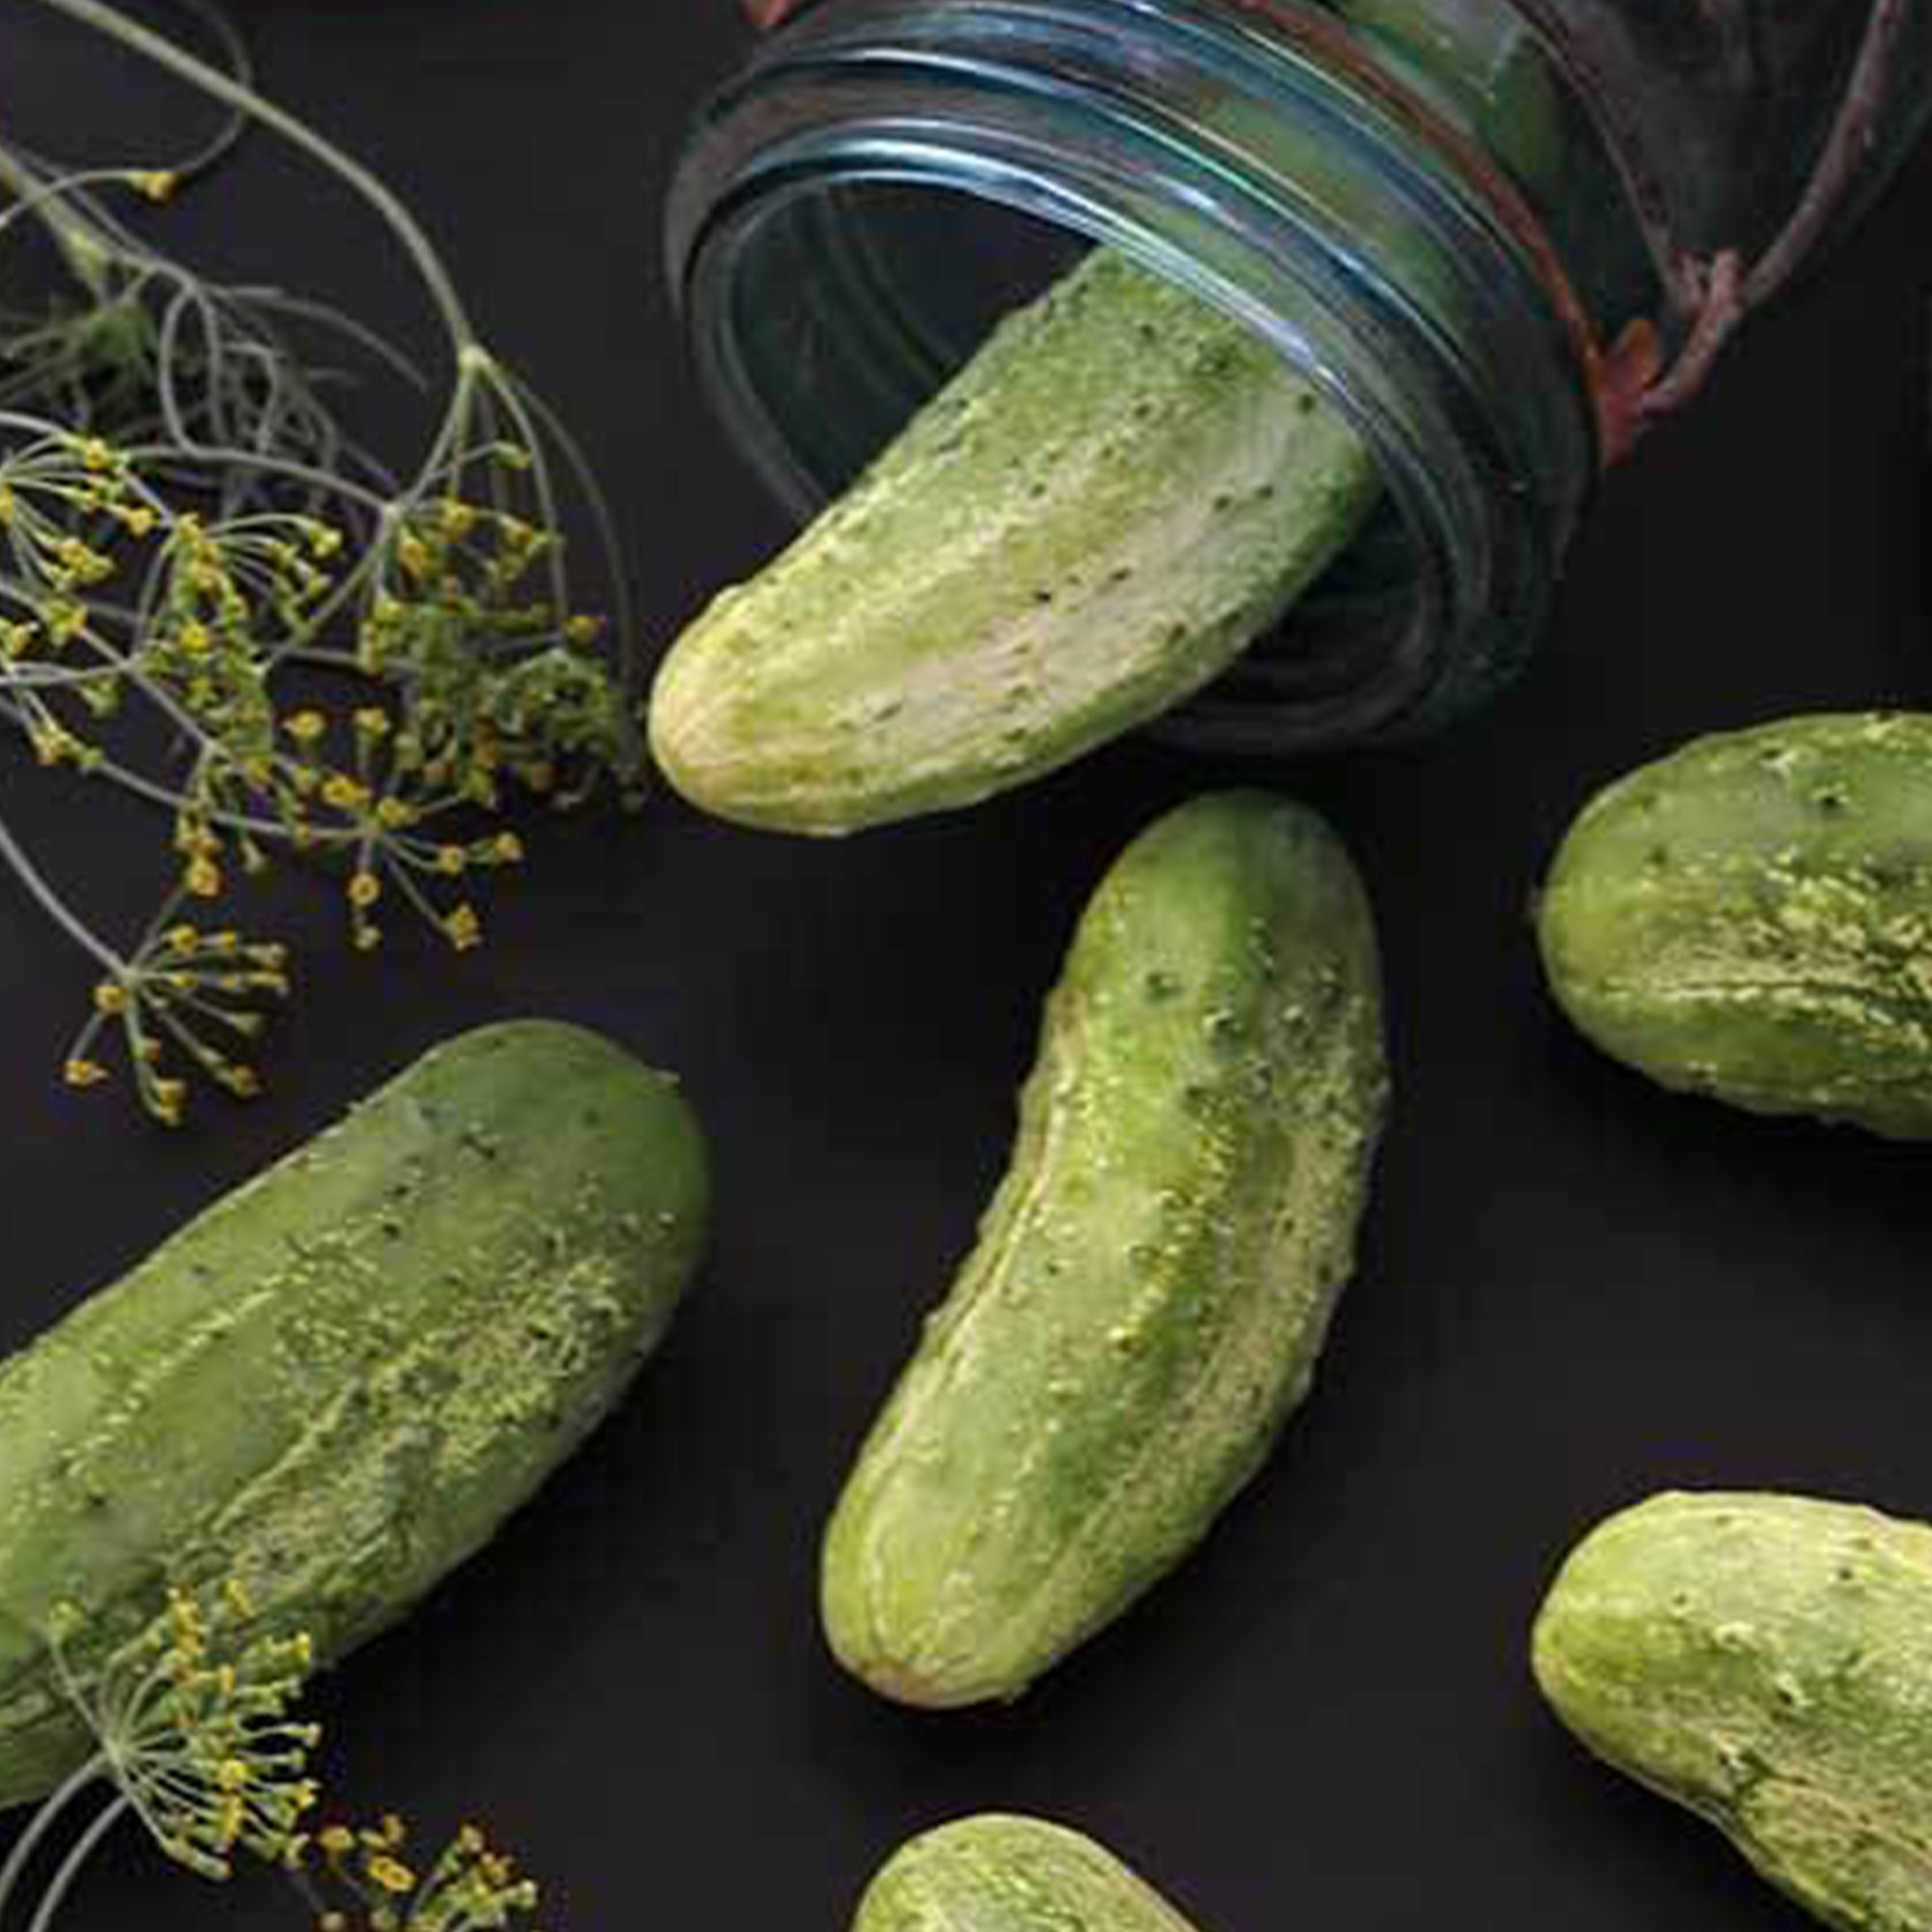 Wisconsin SMR-58 Pickling Cucumber Seeds - 1 OZ ~700 Seeds - Heirloom, Open Pollinated, Non-GMO, Farm & Vegetable Gardening Seeds - image 1 of 2